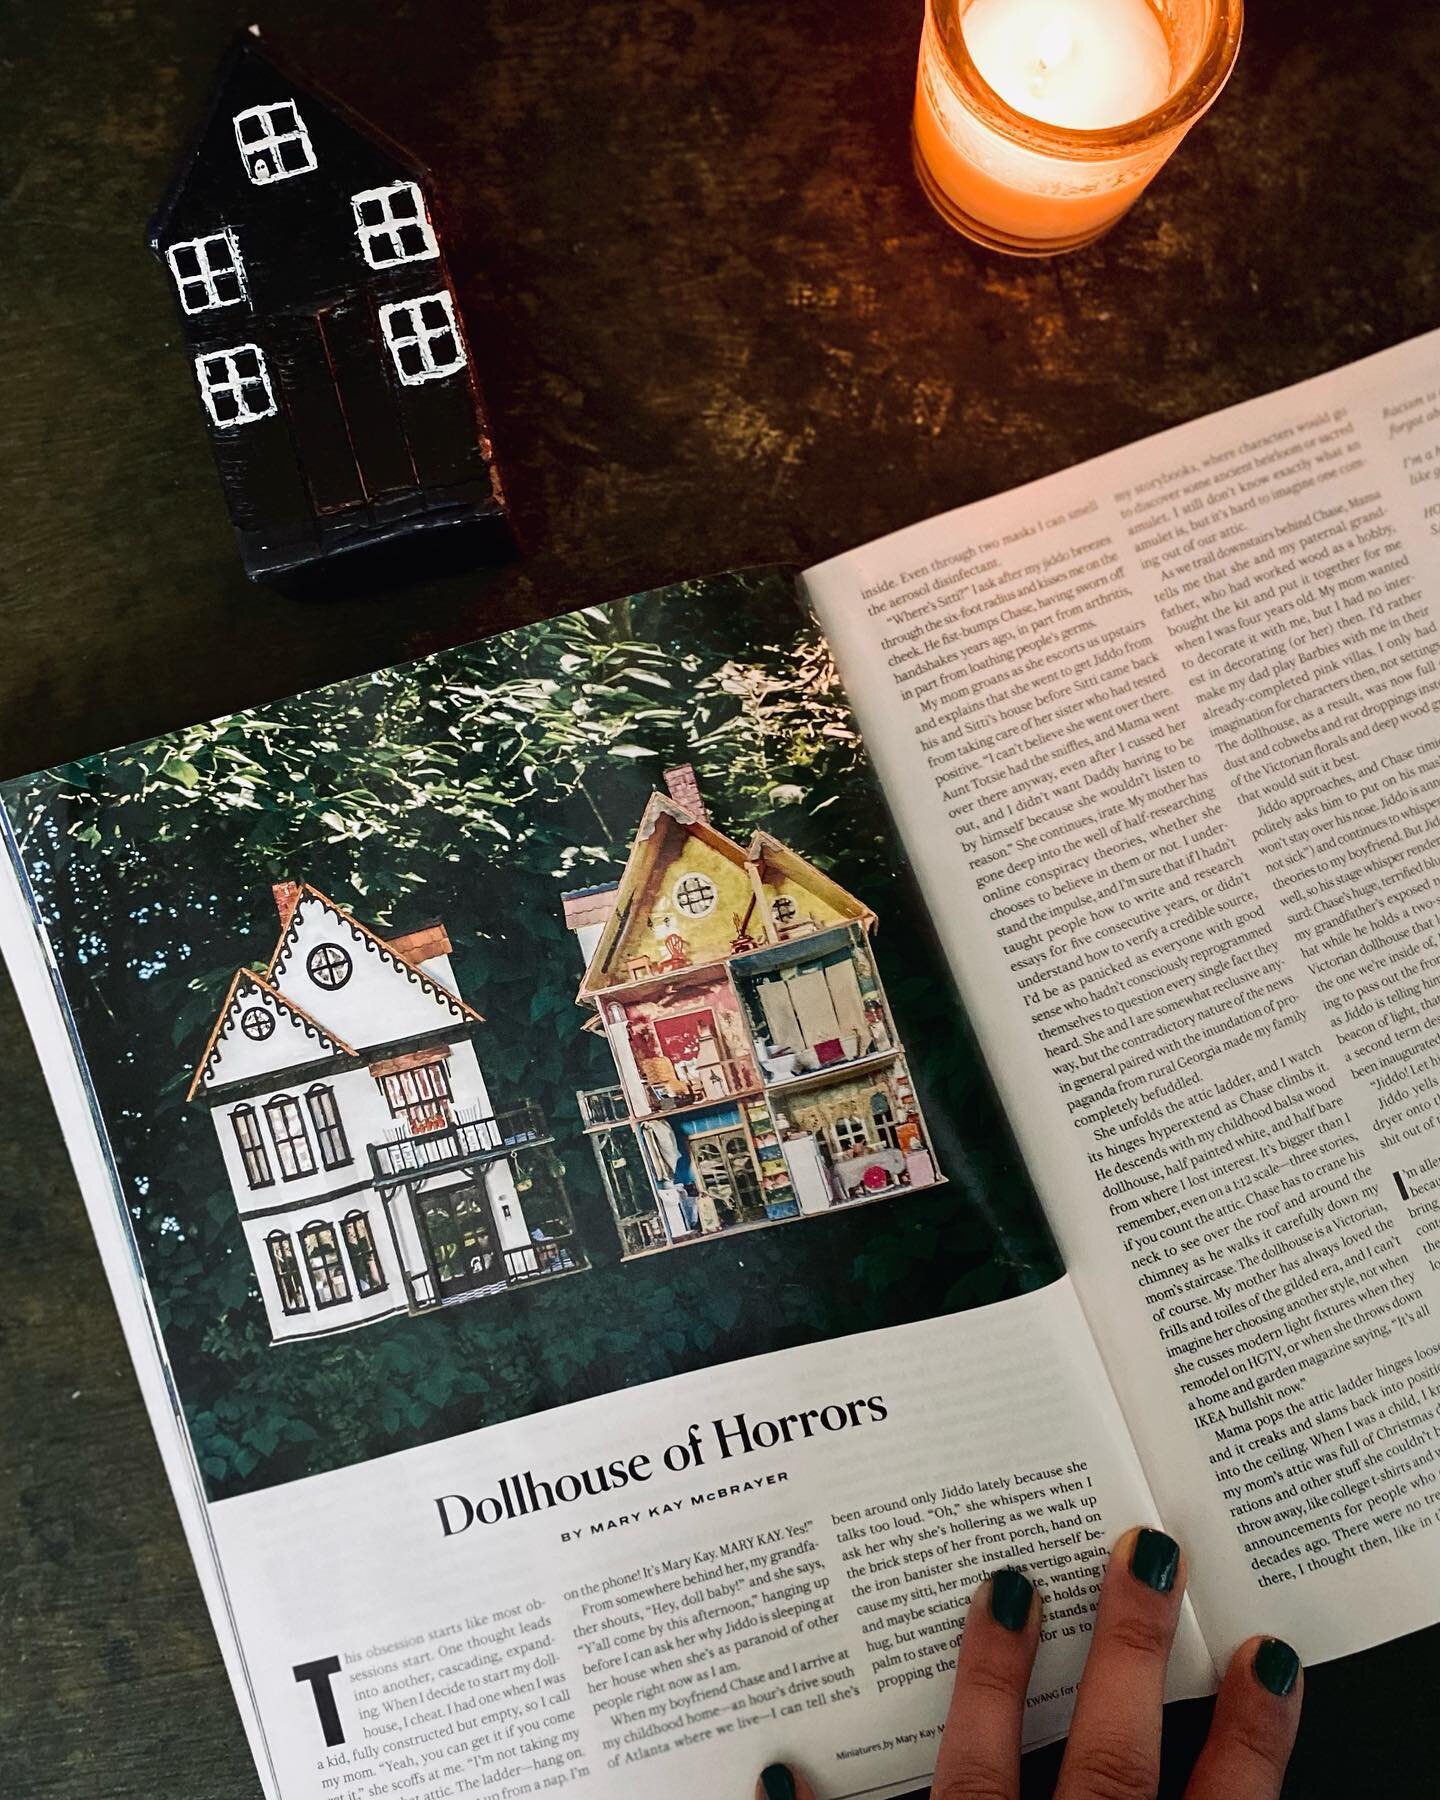 Y&rsquo;all. Go get thee the most recent issue of one of my favorite literary magazines of all time, @oxfordamerican, &amp; read my friend @marykaymcbrayer&rsquo;s piece &ldquo;Dollhouse of Horrors.&rdquo; 

I&rsquo;m just got my copy in the mail. Th